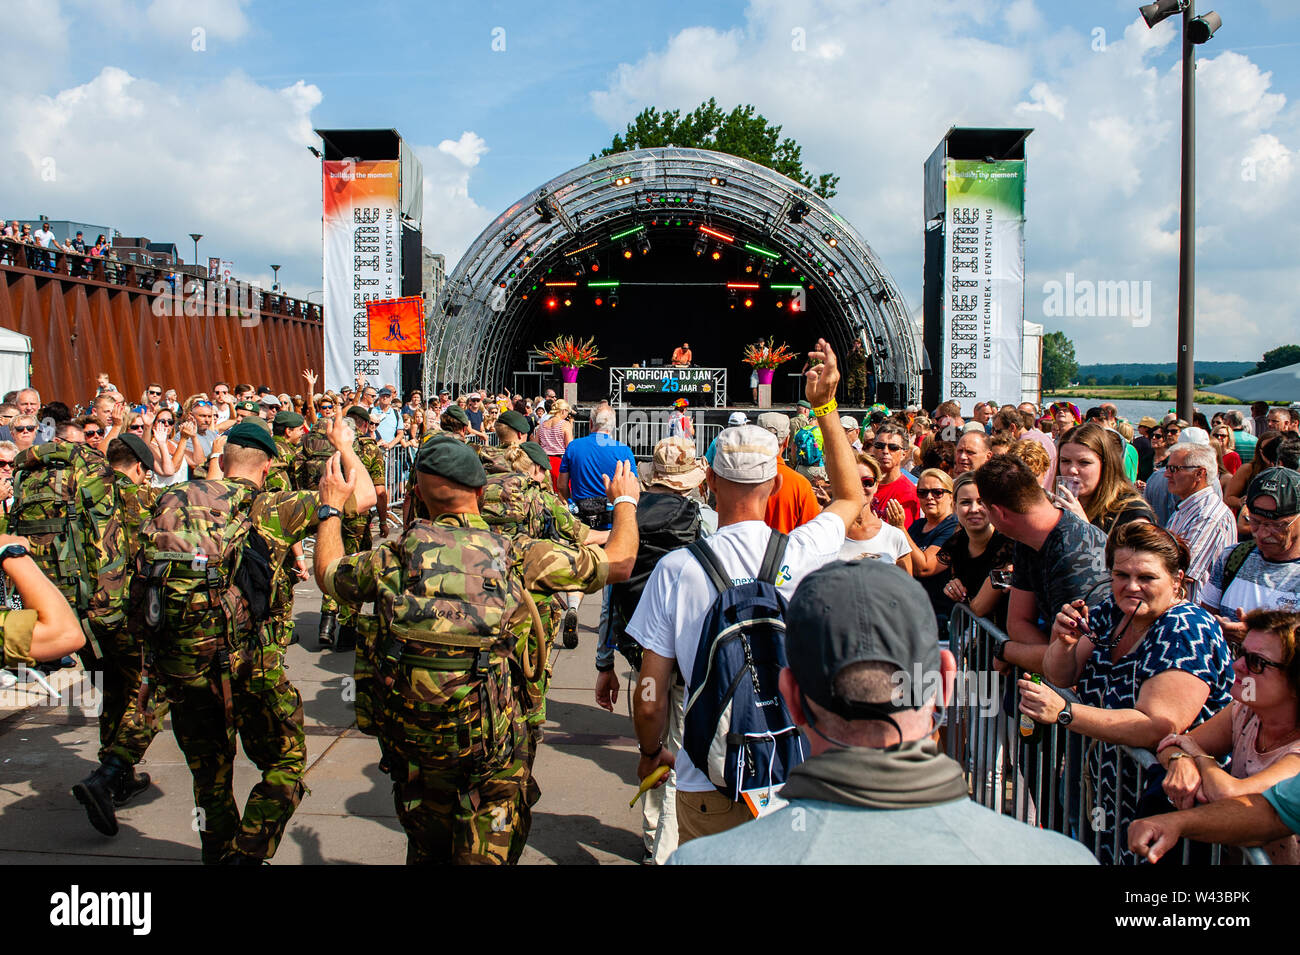 Soldiers dance while walking during the event.Since it is the world’s biggest multi-day walking event, the Four Days March is seen as the prime example of sportsmanship and international bonding between military servicemen and women and civilians from many different countries. This year marks the 75th anniversary of the pontoon bridge that has been set up each year temporarily over the River Meuse at Cuijk. The final kilometers are at the Via Gladiola Street, where as tradition every participant carries gladiolus plants and are welcomed by relatives and partners. Stock Photo